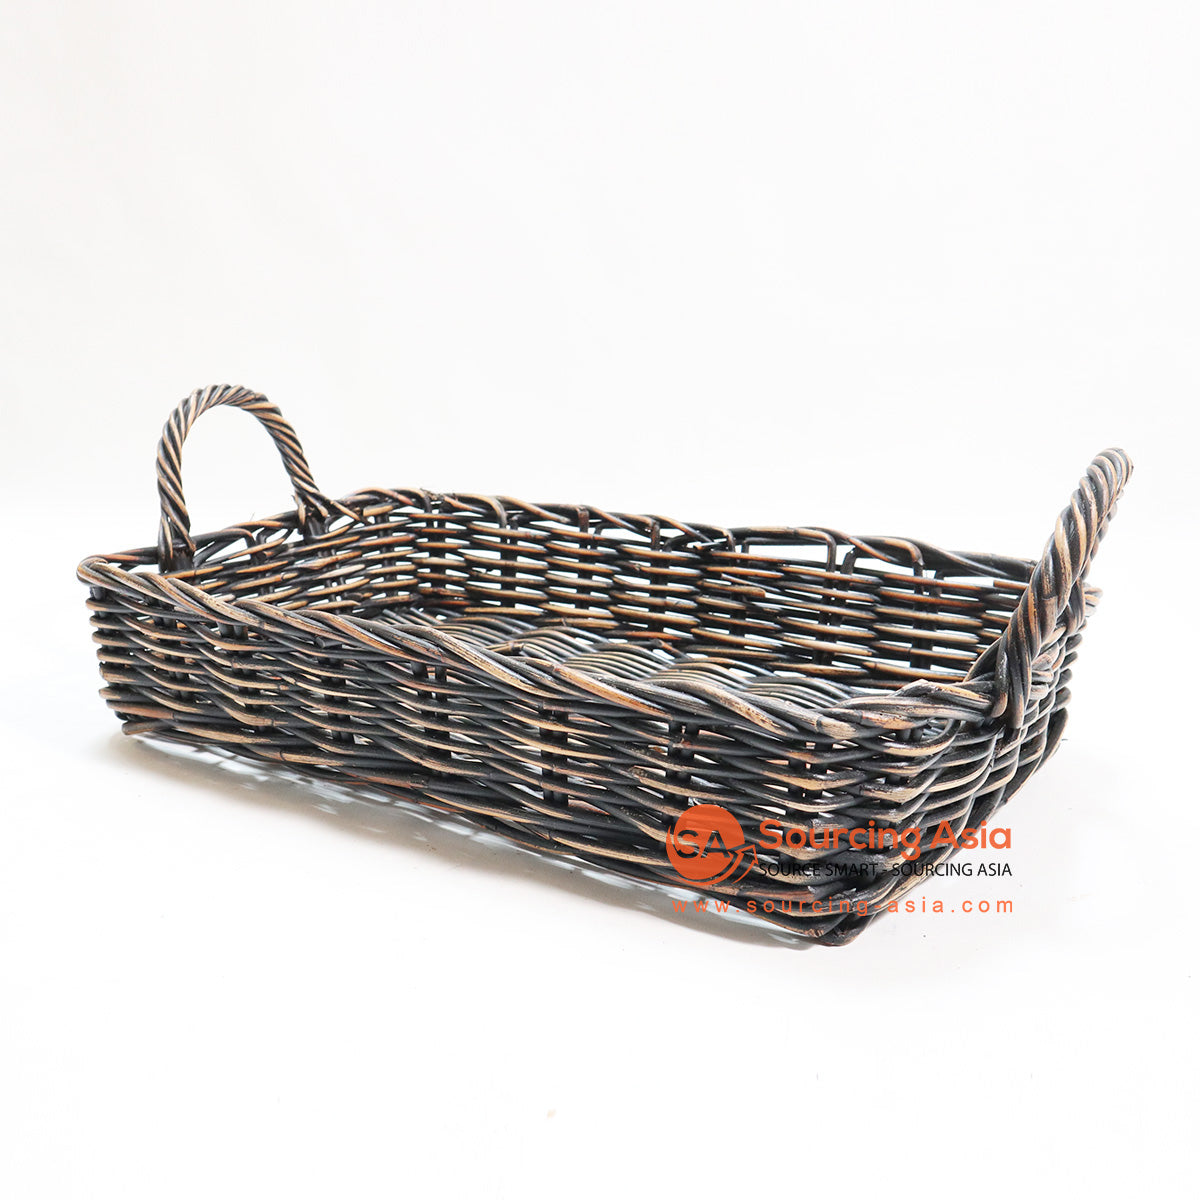 HBSC116-1 BLACK WASHED ANTIQUE RATTAN TRAY WITH HANDLE